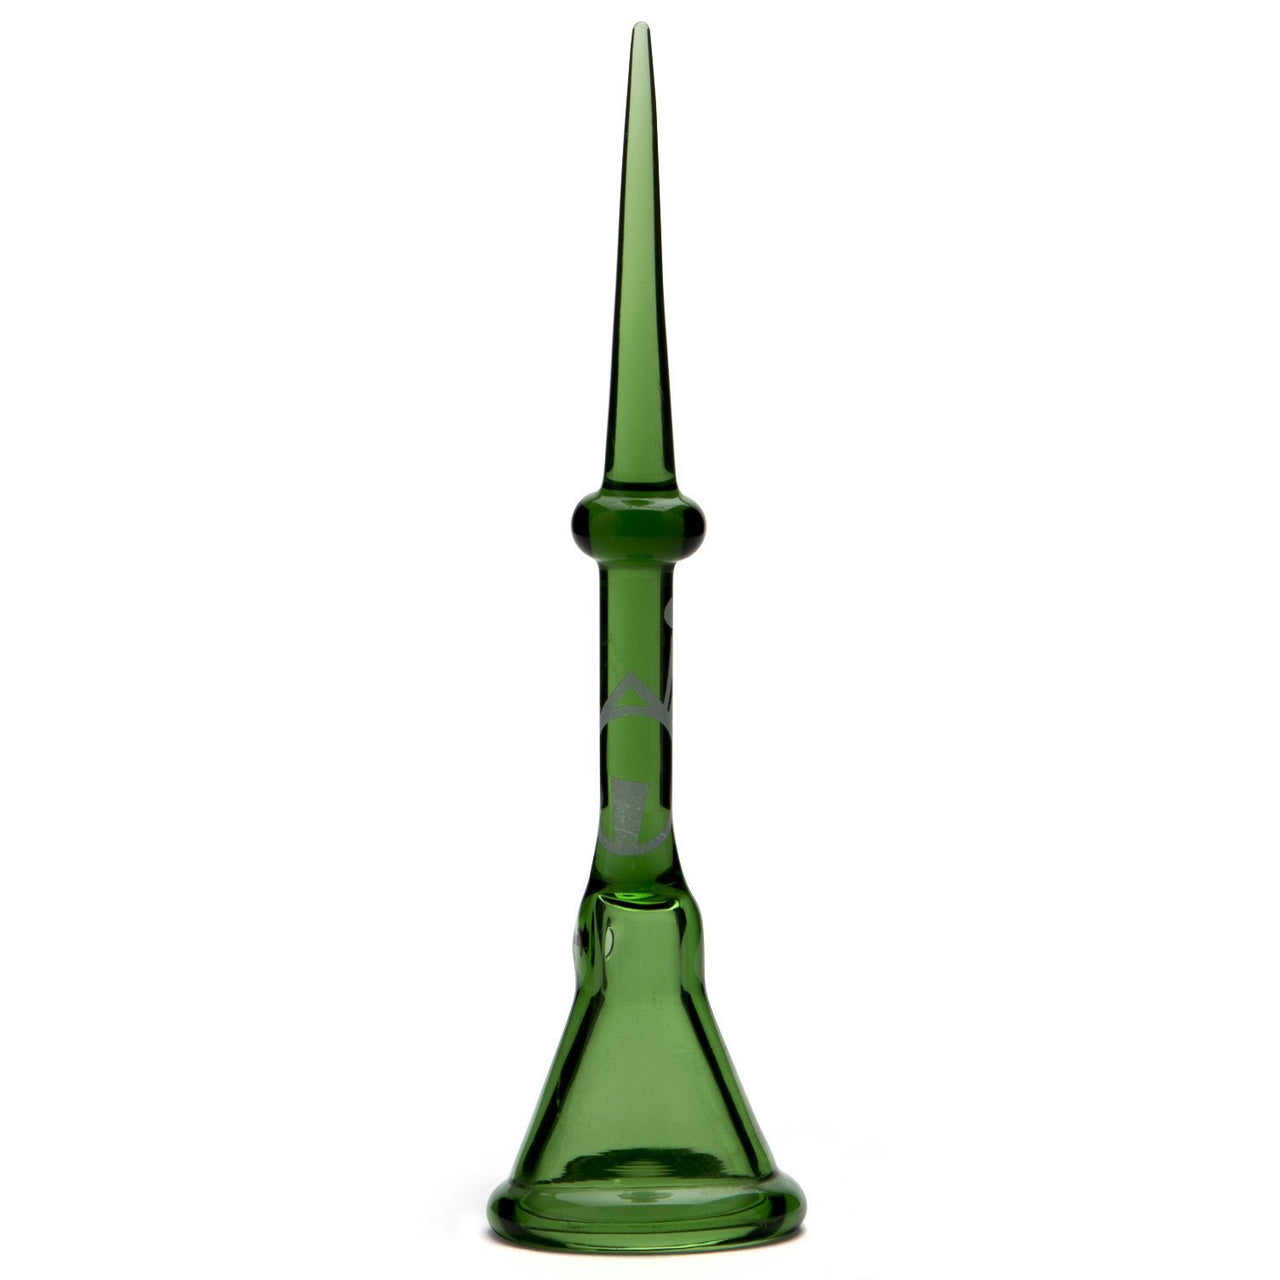 Home Blown Glass Carb Cap Dabber - Green - 420 Science - The most trusted online smoke shop.